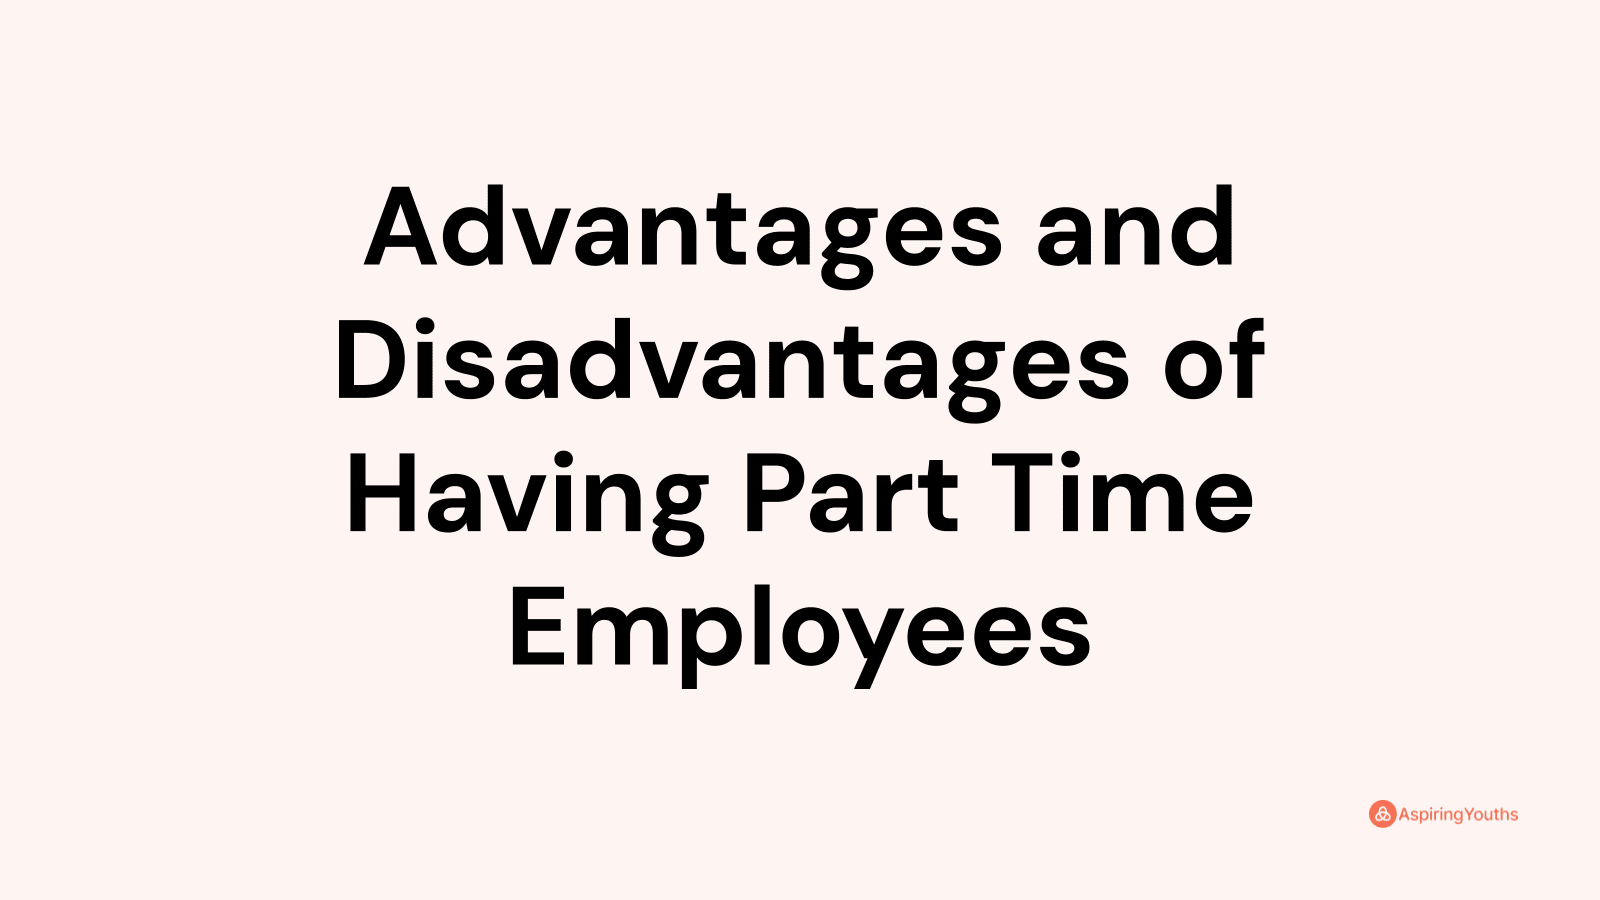 Advantages and disadvantages of Having Part Time Employees